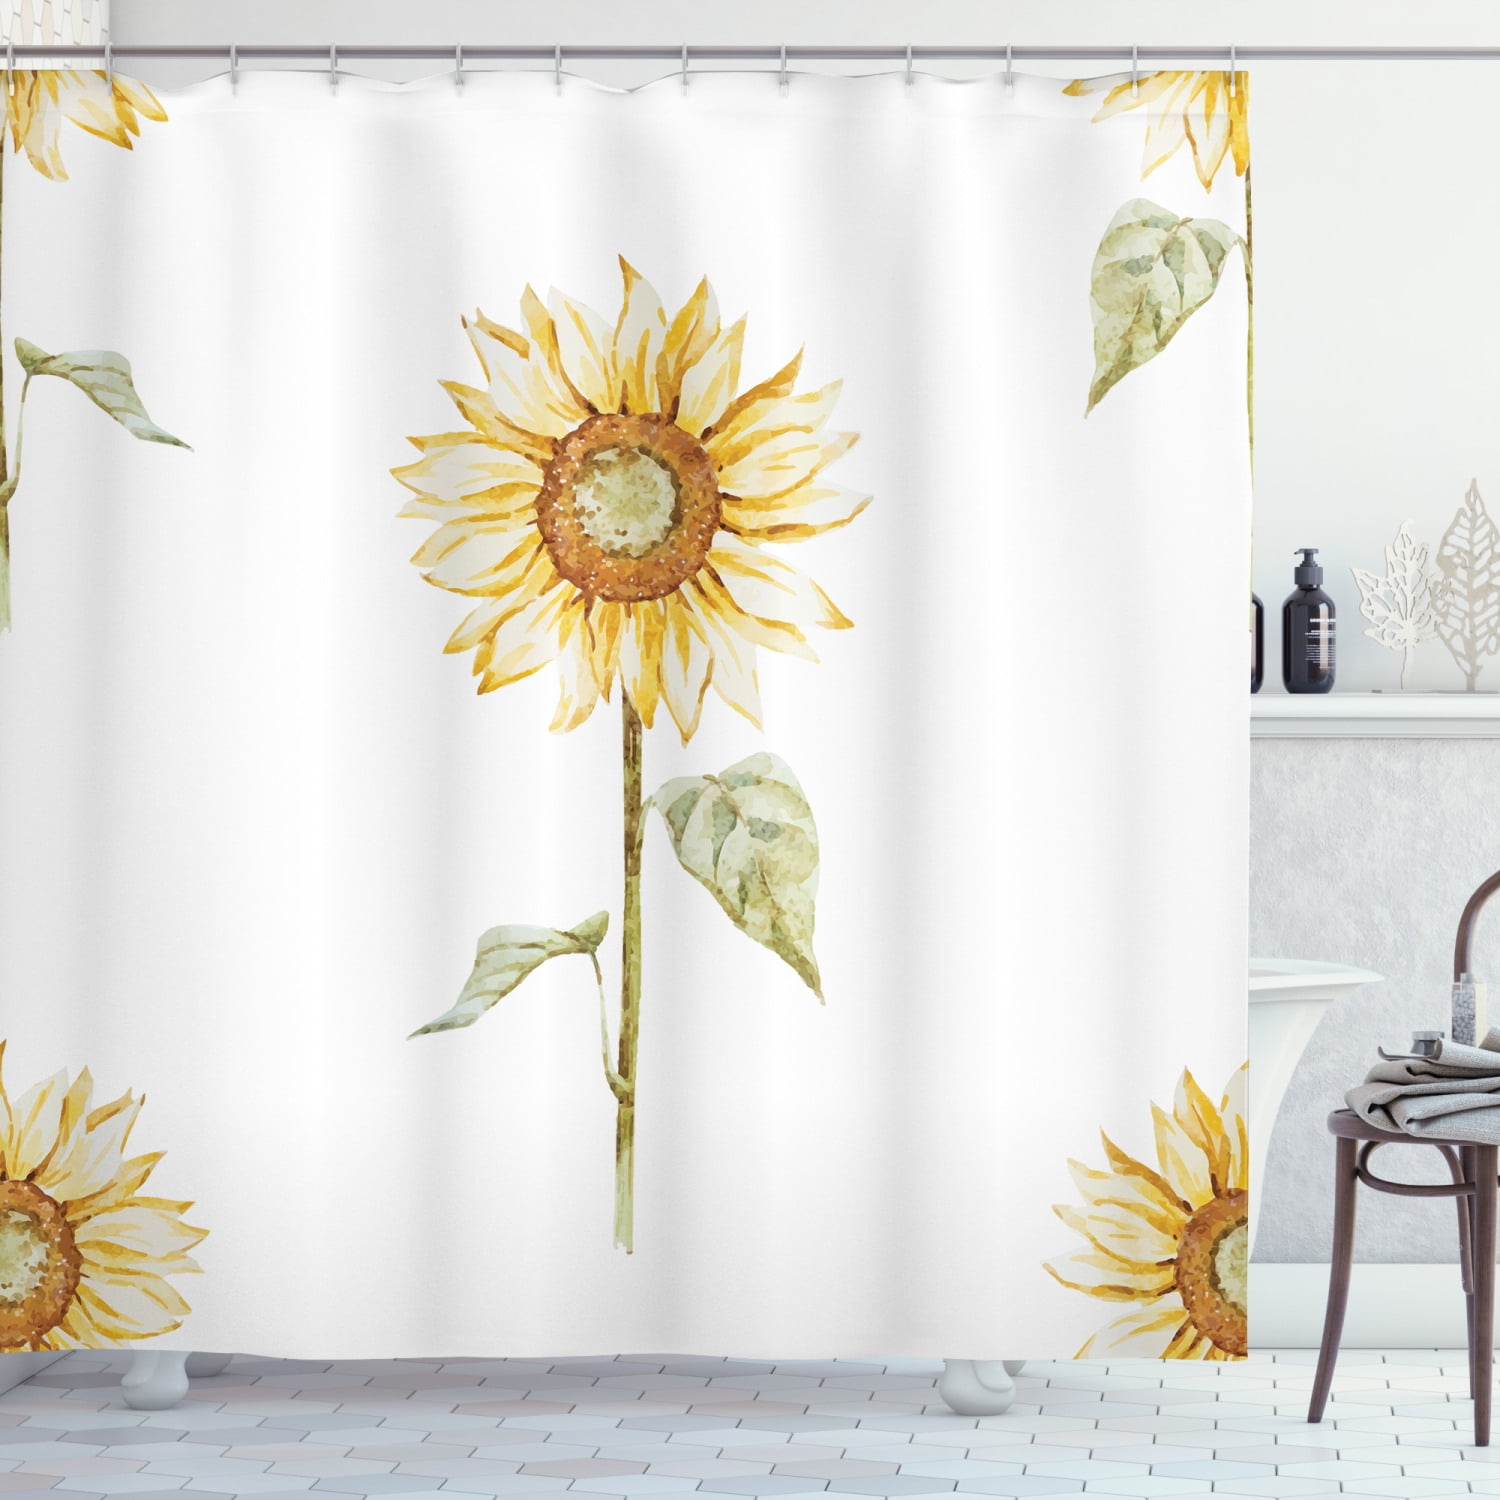 Details about   Retro Sunflower Shower Curtain With Hook Bath Mat Bathroom Toilet Cover Rug Set 